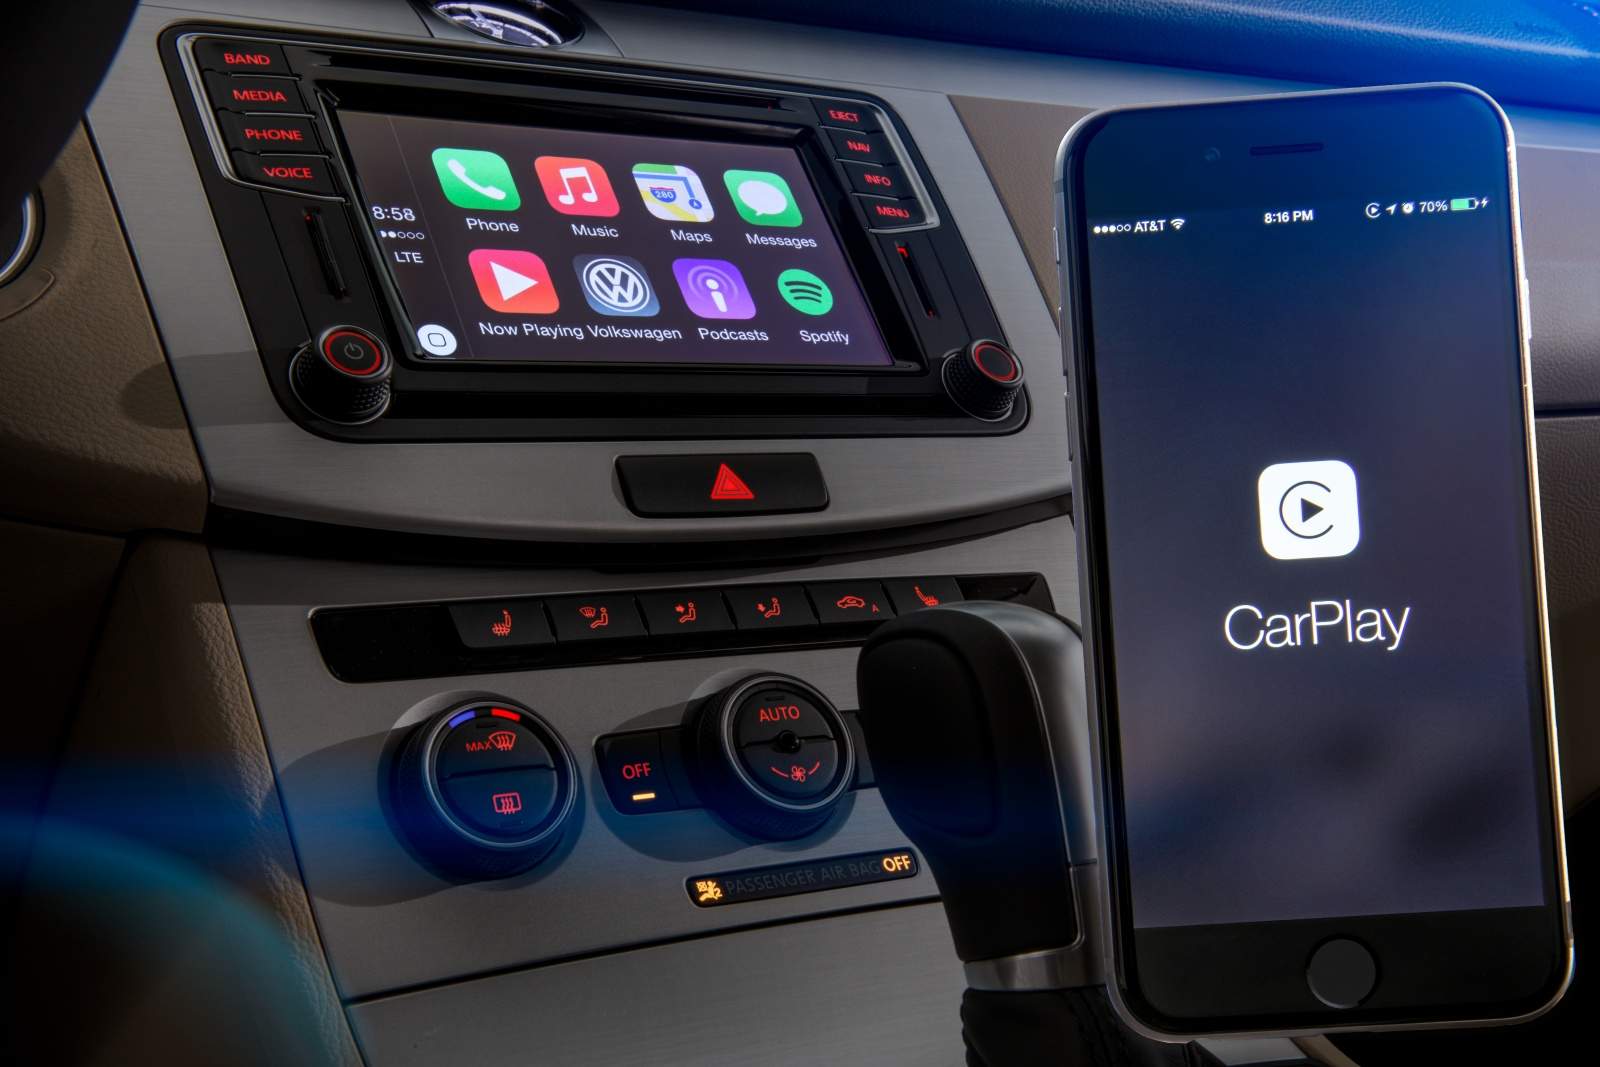 VW's 2016 lineup is rolling deep with CarPlay.